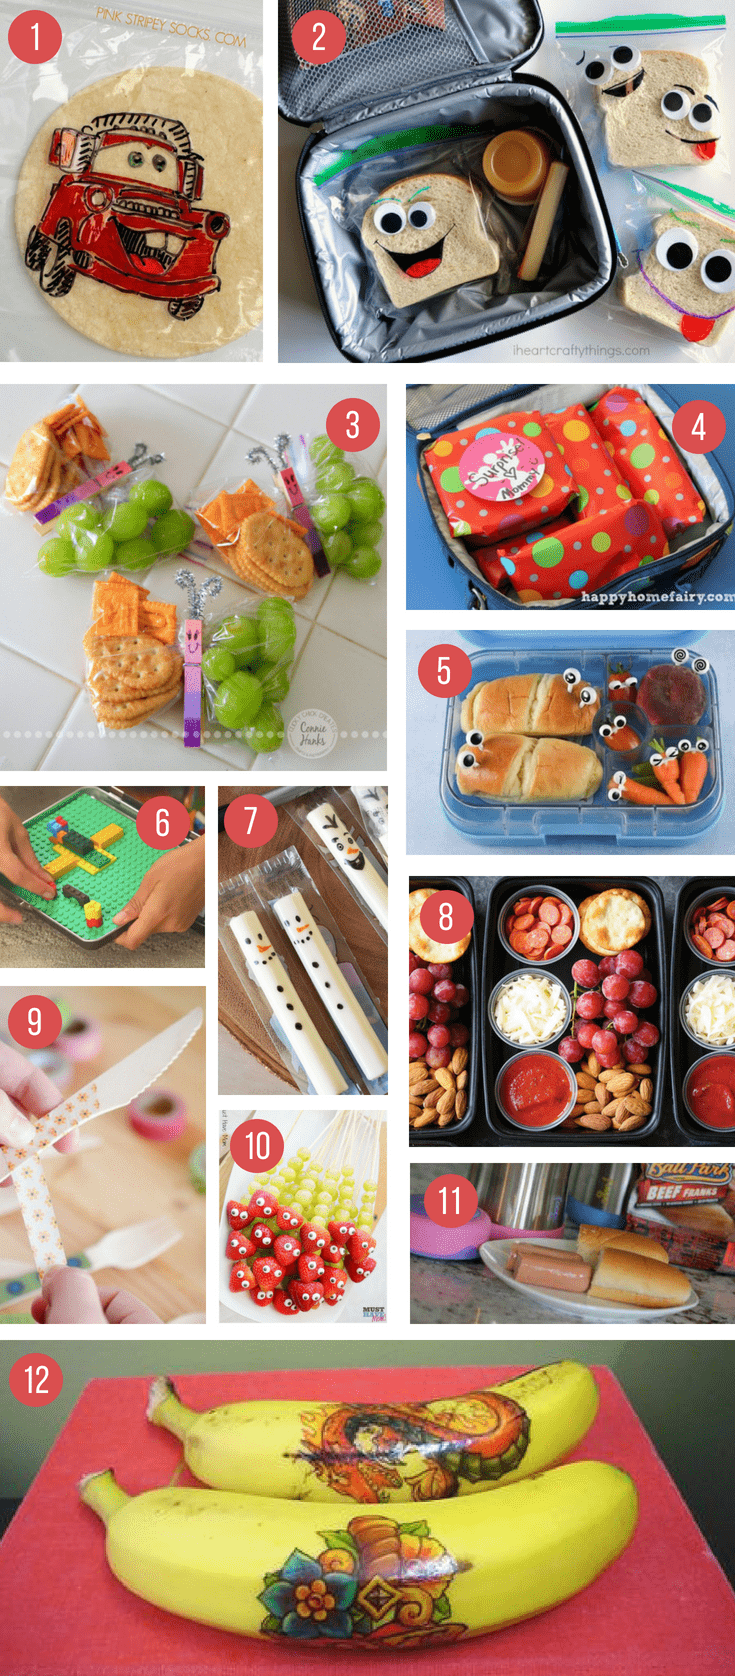 My Top 5 Hacks for Packing School Lunches • One Lovely Life